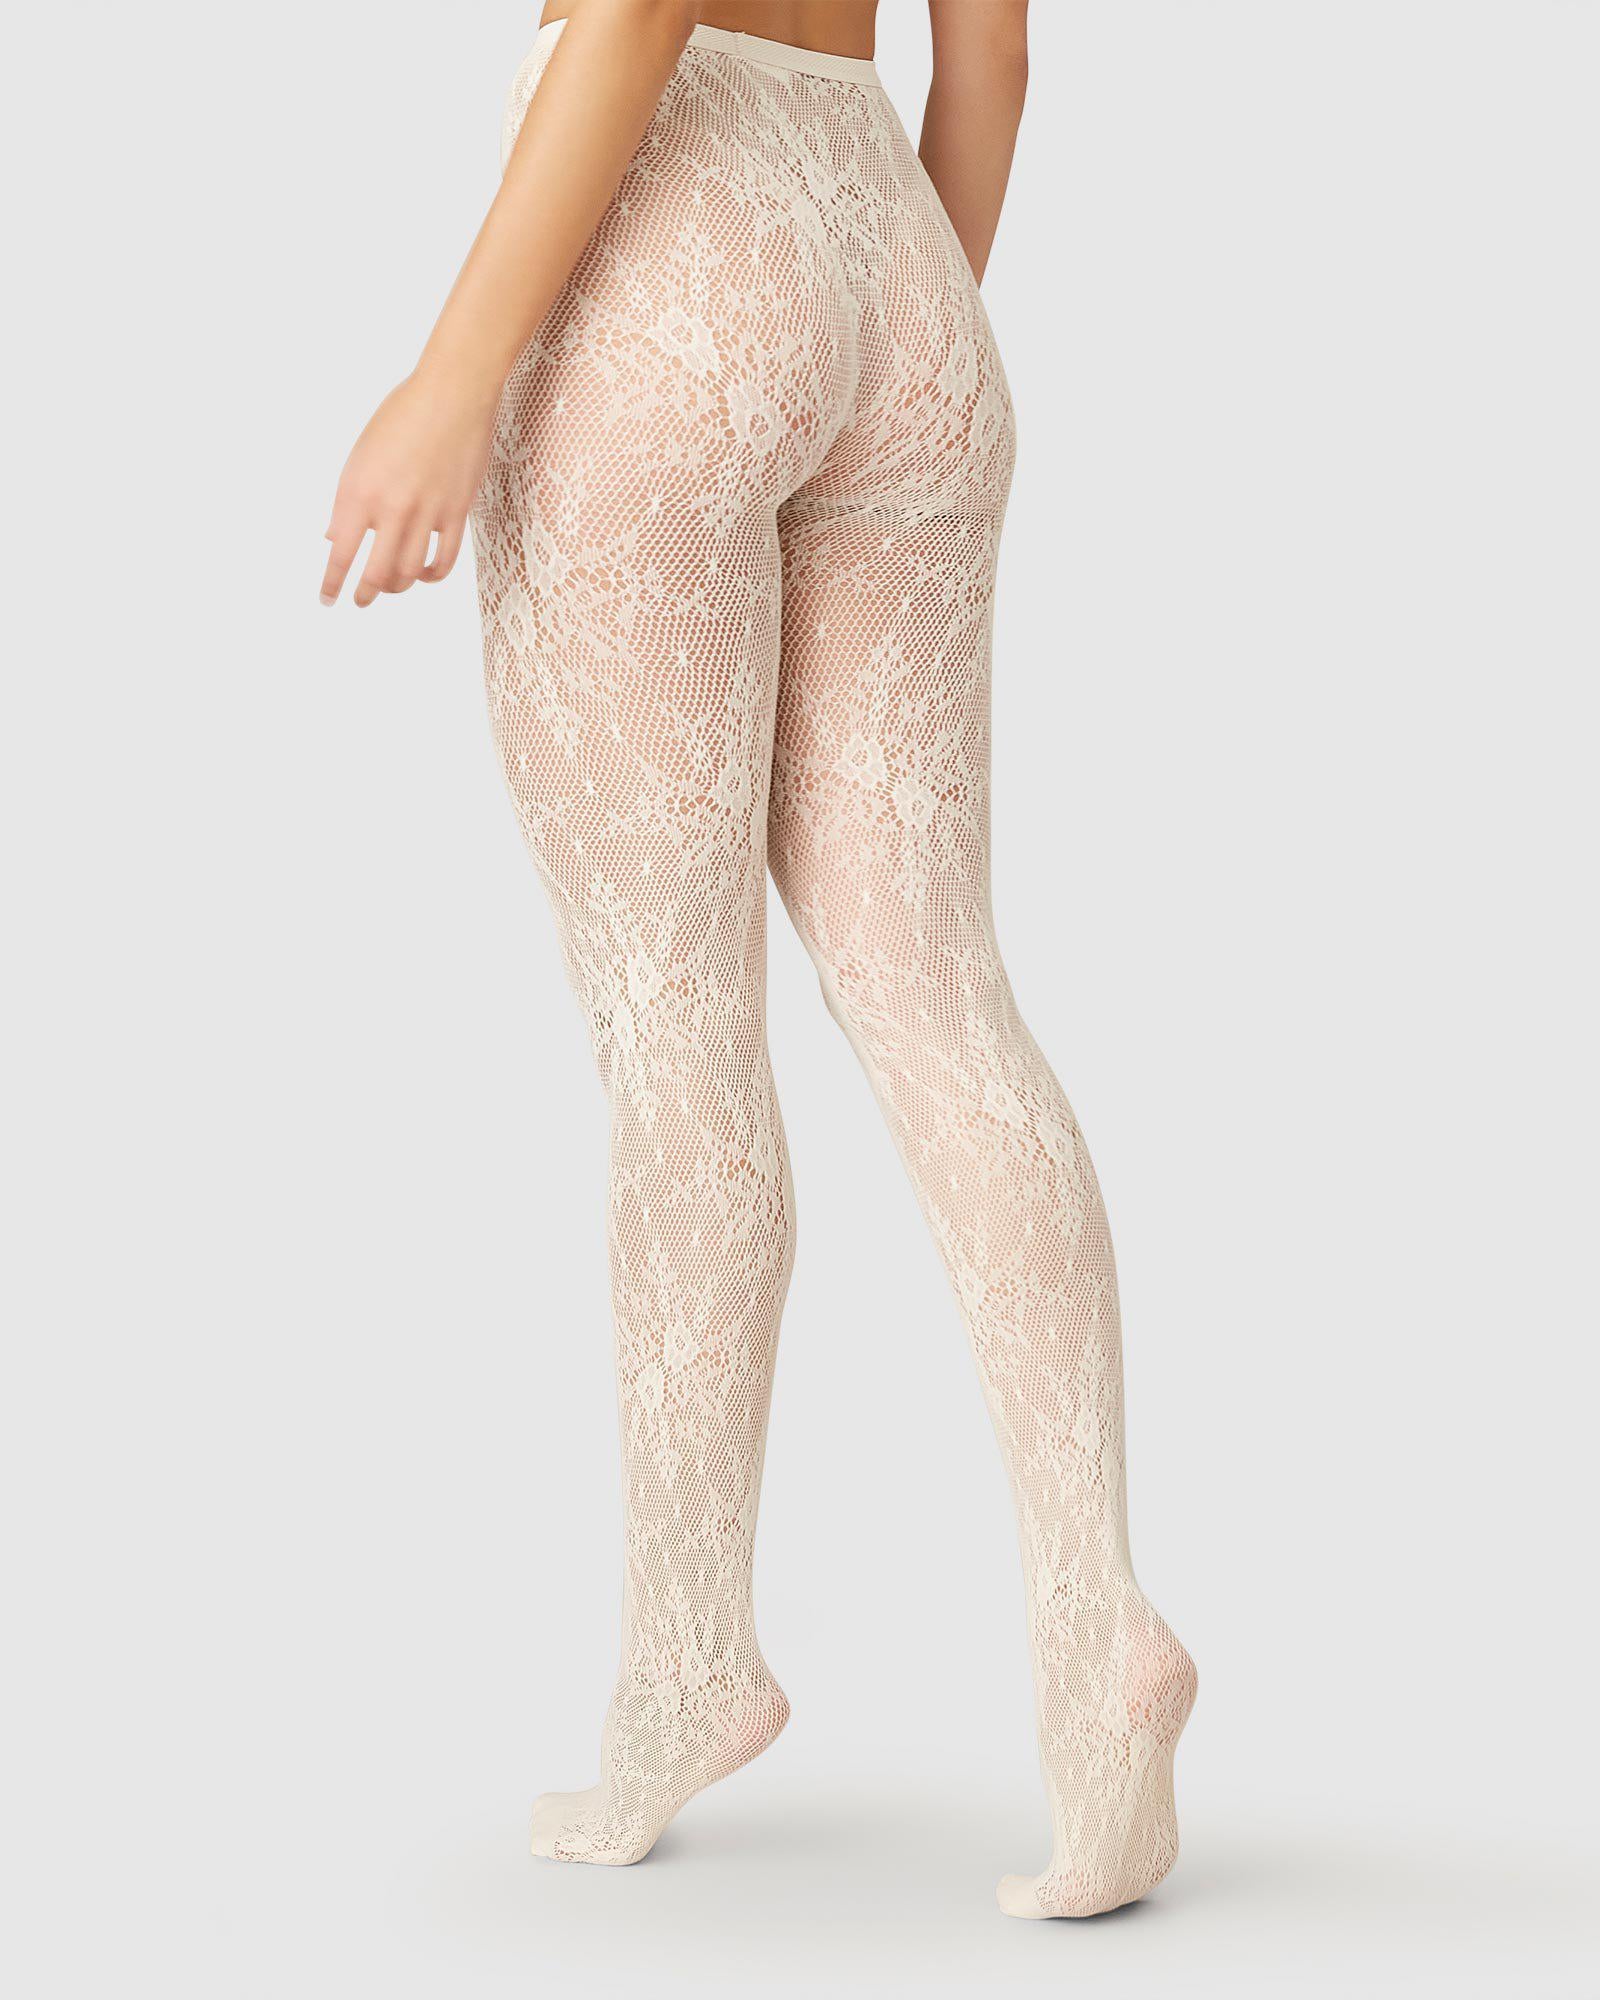 Linda Beige Lace Tights